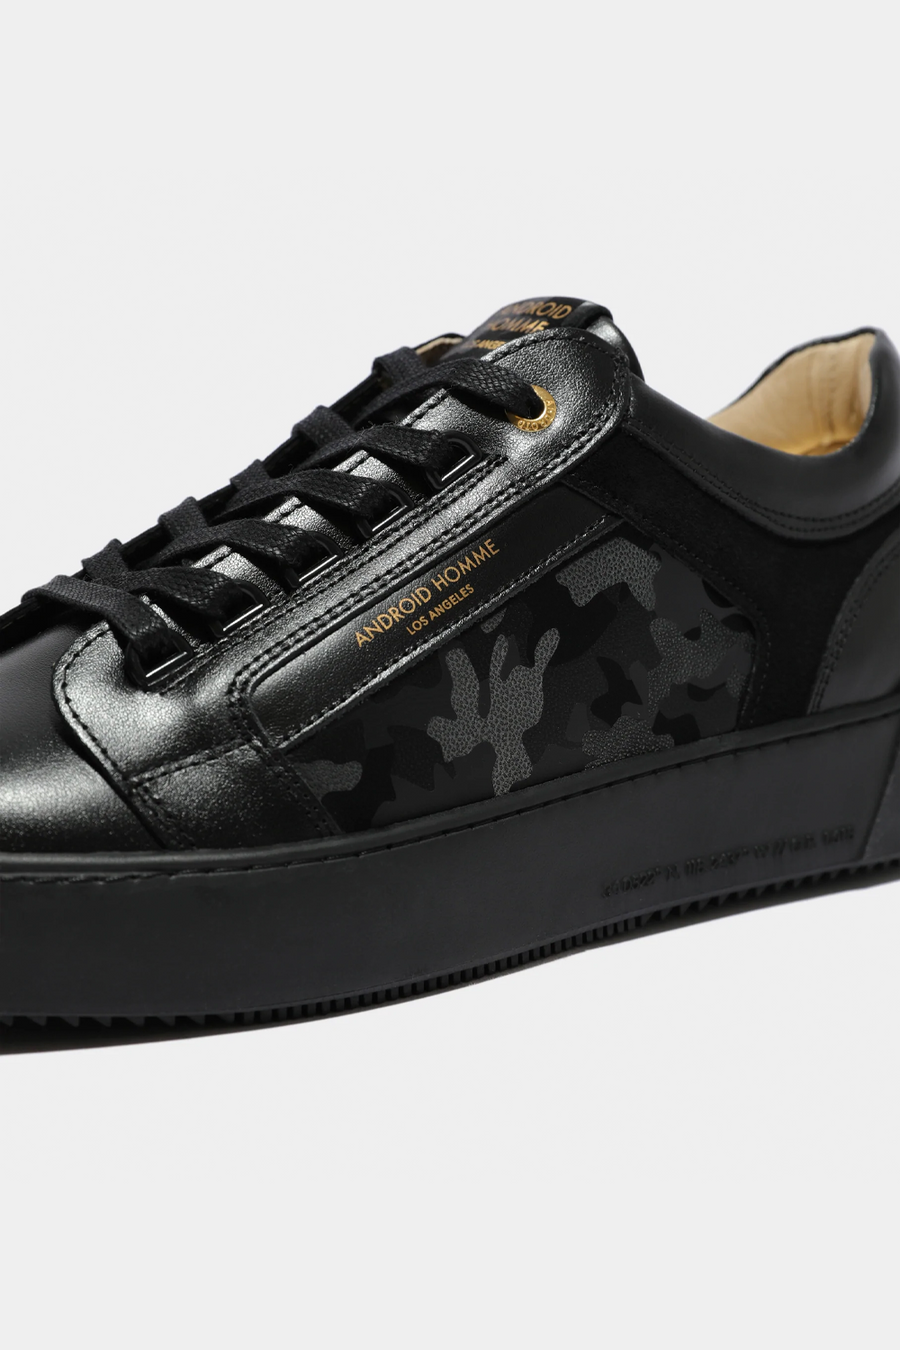 Buy the Android Homme Venice Leather Camo Sneaker in Black at Intro. Spend £50 for free UK delivery. Official stockists. We ship worldwide.